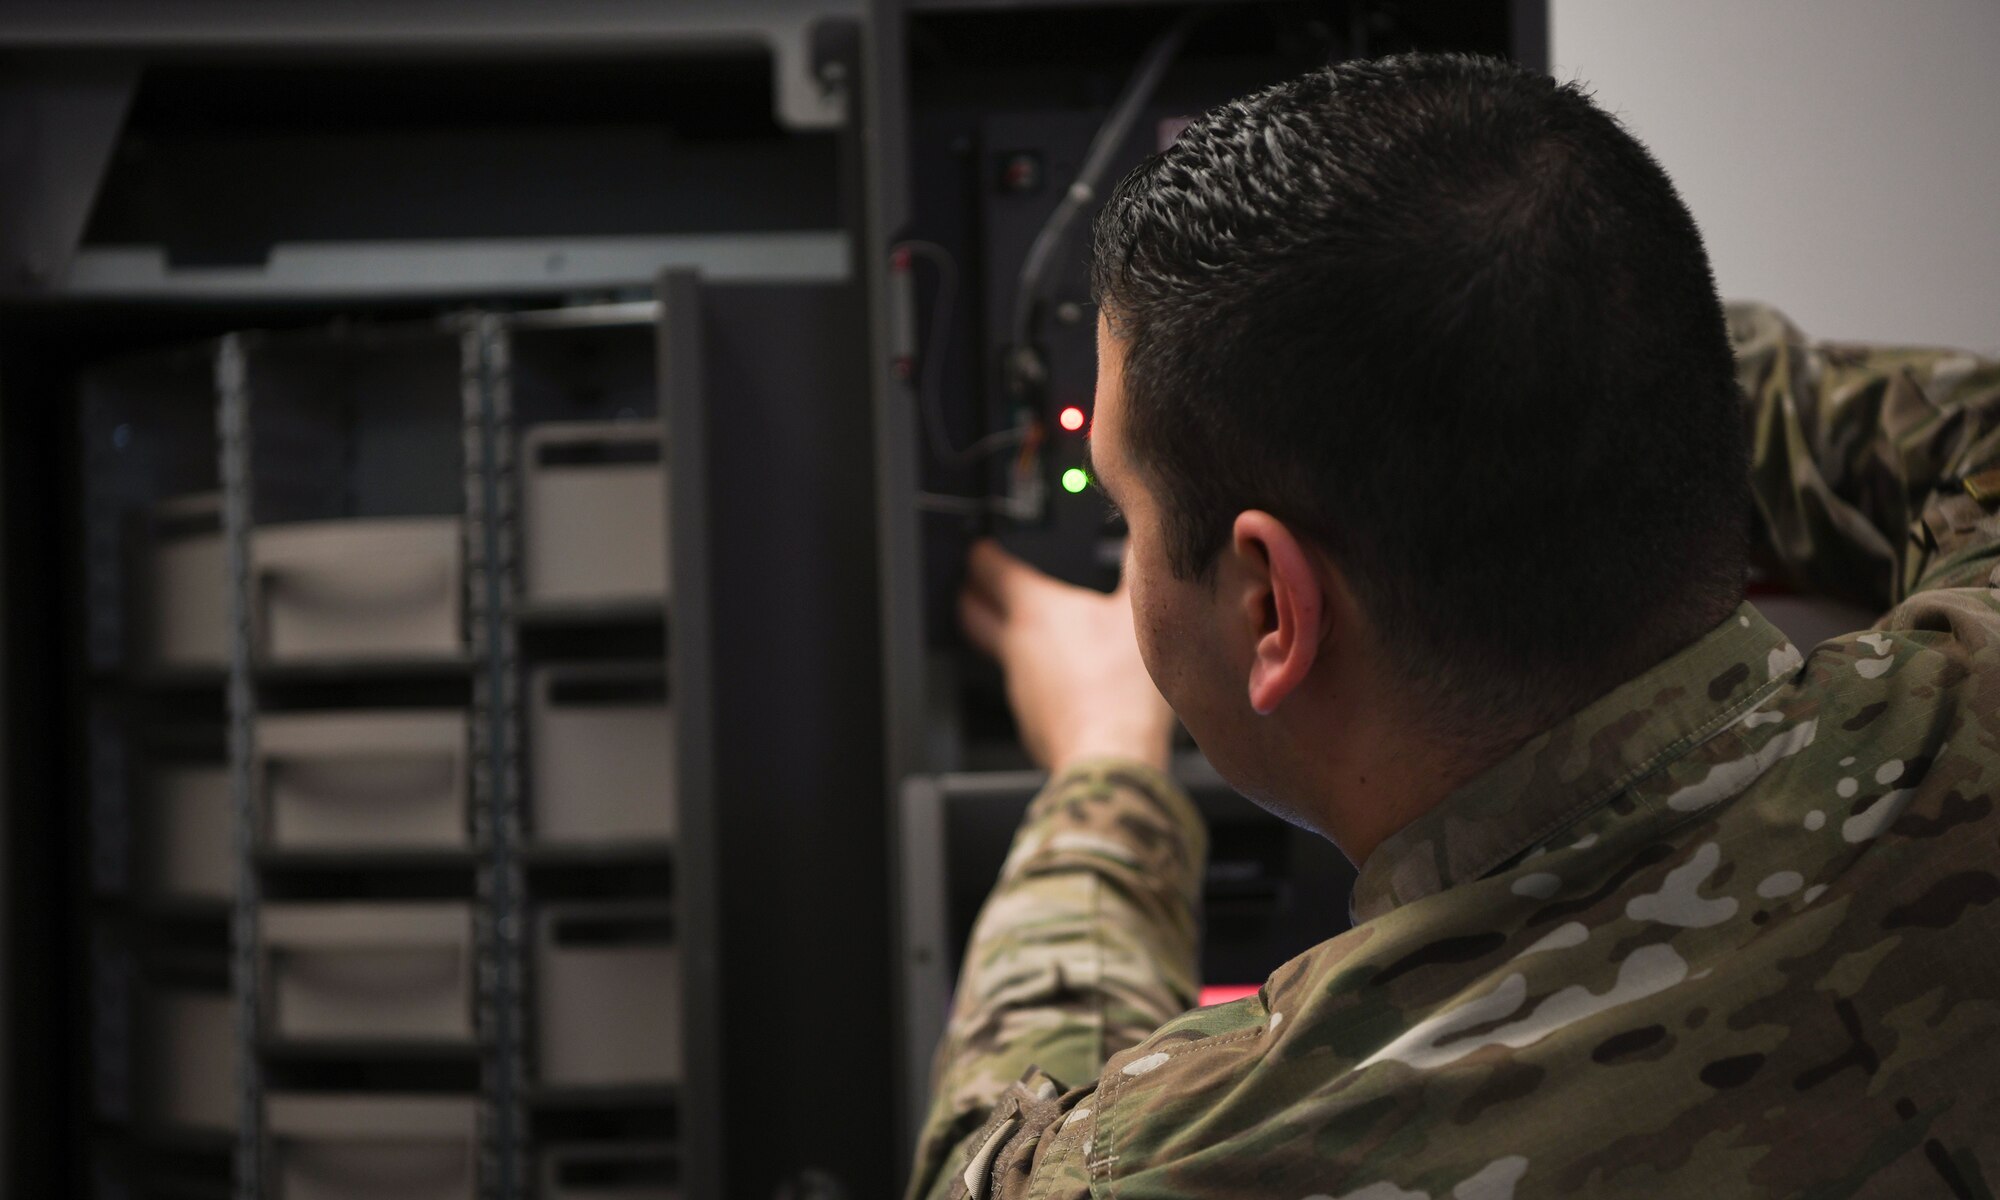 U.S. Air Force Staff Sgt. Slade Muraira, 437th Aircraft Maintenance Squadron Support shift leader, inspects a newly acquired auto-crib machine that was purchased for the squadron at Joint Base Charleston, S.C., Nov. 8, 2019. The new auto-mated tool crib will be able to hold the same amount of tools and maintenance parts and only take up half the space. The Airmen and NCOs of the support tool room went through a yearlong process of requesting and justifying the purchase of an automated tool crib to not only improve the quality of life for their Airmen in the shop, but also to increase their shop’s positive impact on the Joint Base Charleston flightline. The tool crib will save over 1000 man hours in labor by automatically keeping accountability of any of the tools and parts that are checked out as well as assisting in keeping a constant inventory on items in stock. The machine will also notify members when new parts should be ordered based on the supply and demand tempo of each individual part.